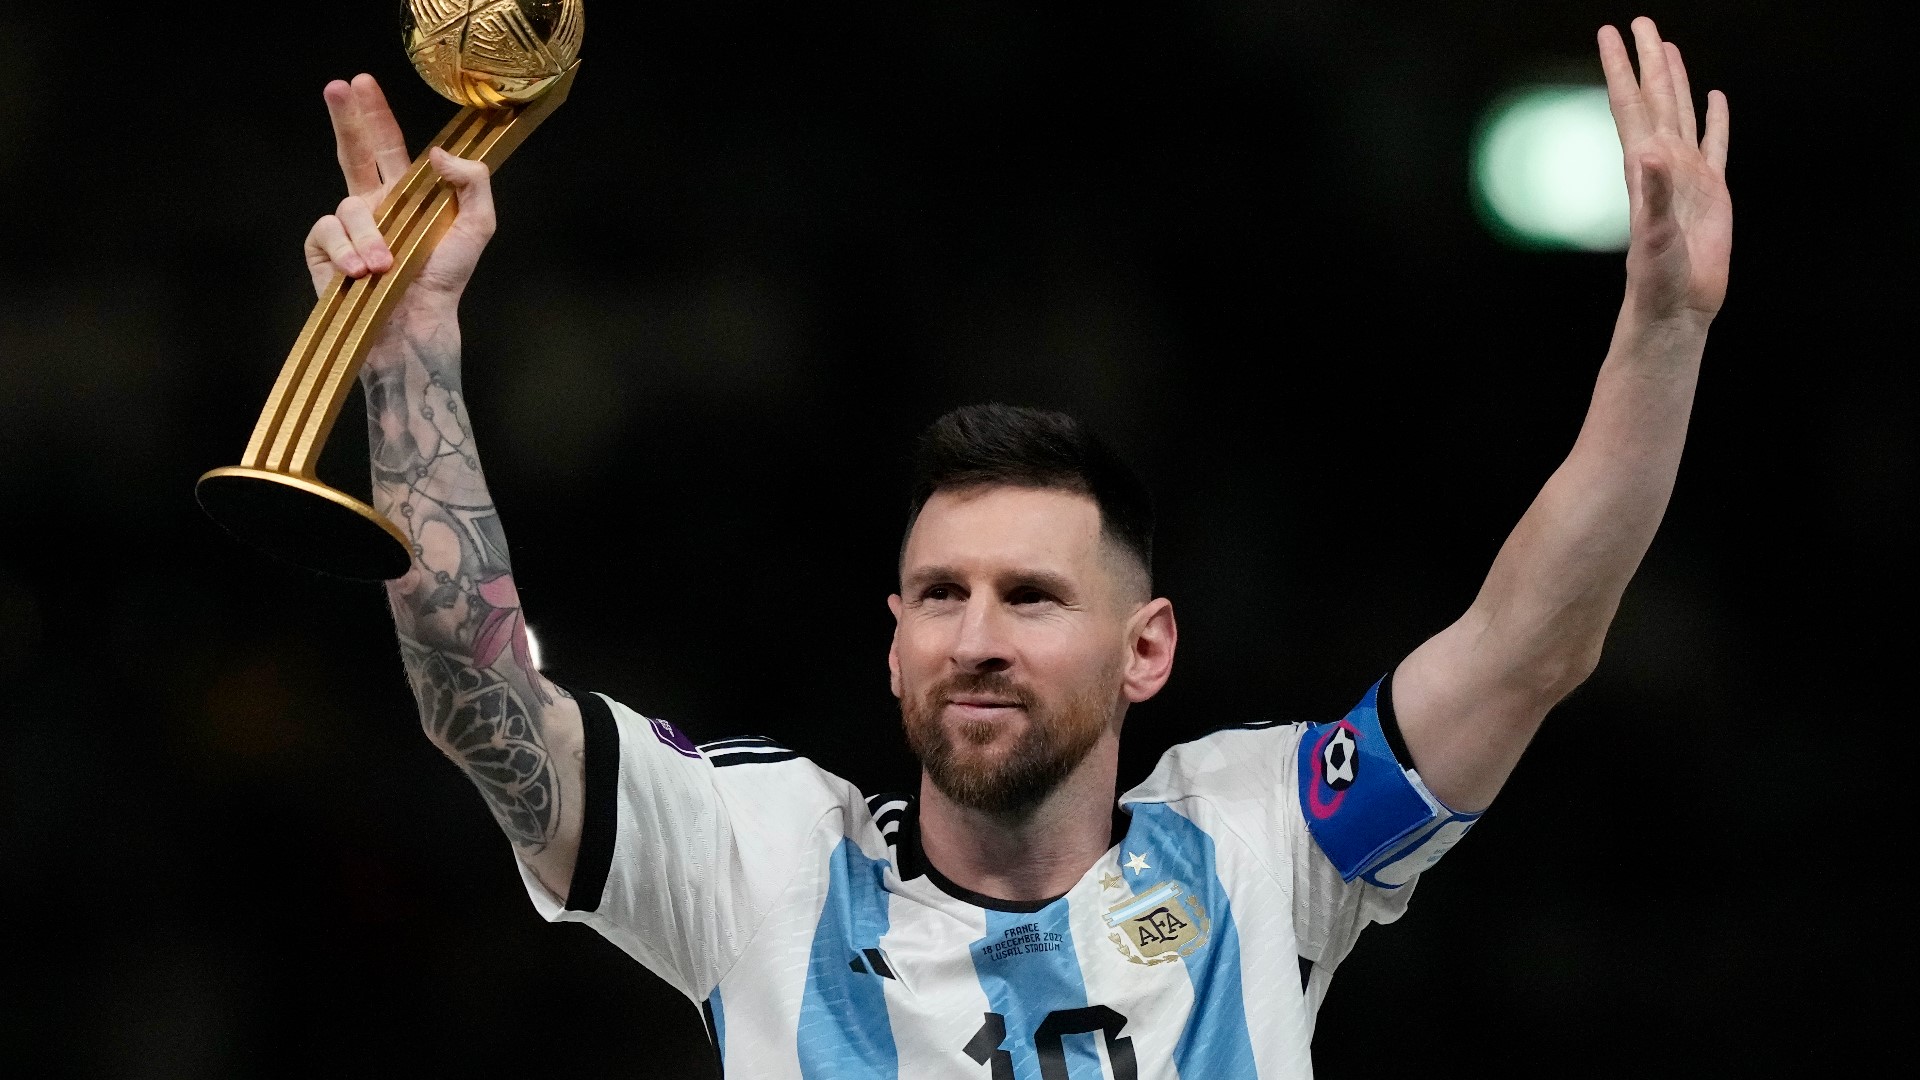 After an astounding career in Europe and a 2022 World Cup win with Argentina, Messi will play in the U.S. for the first time. Here's where Iowans could watch him.